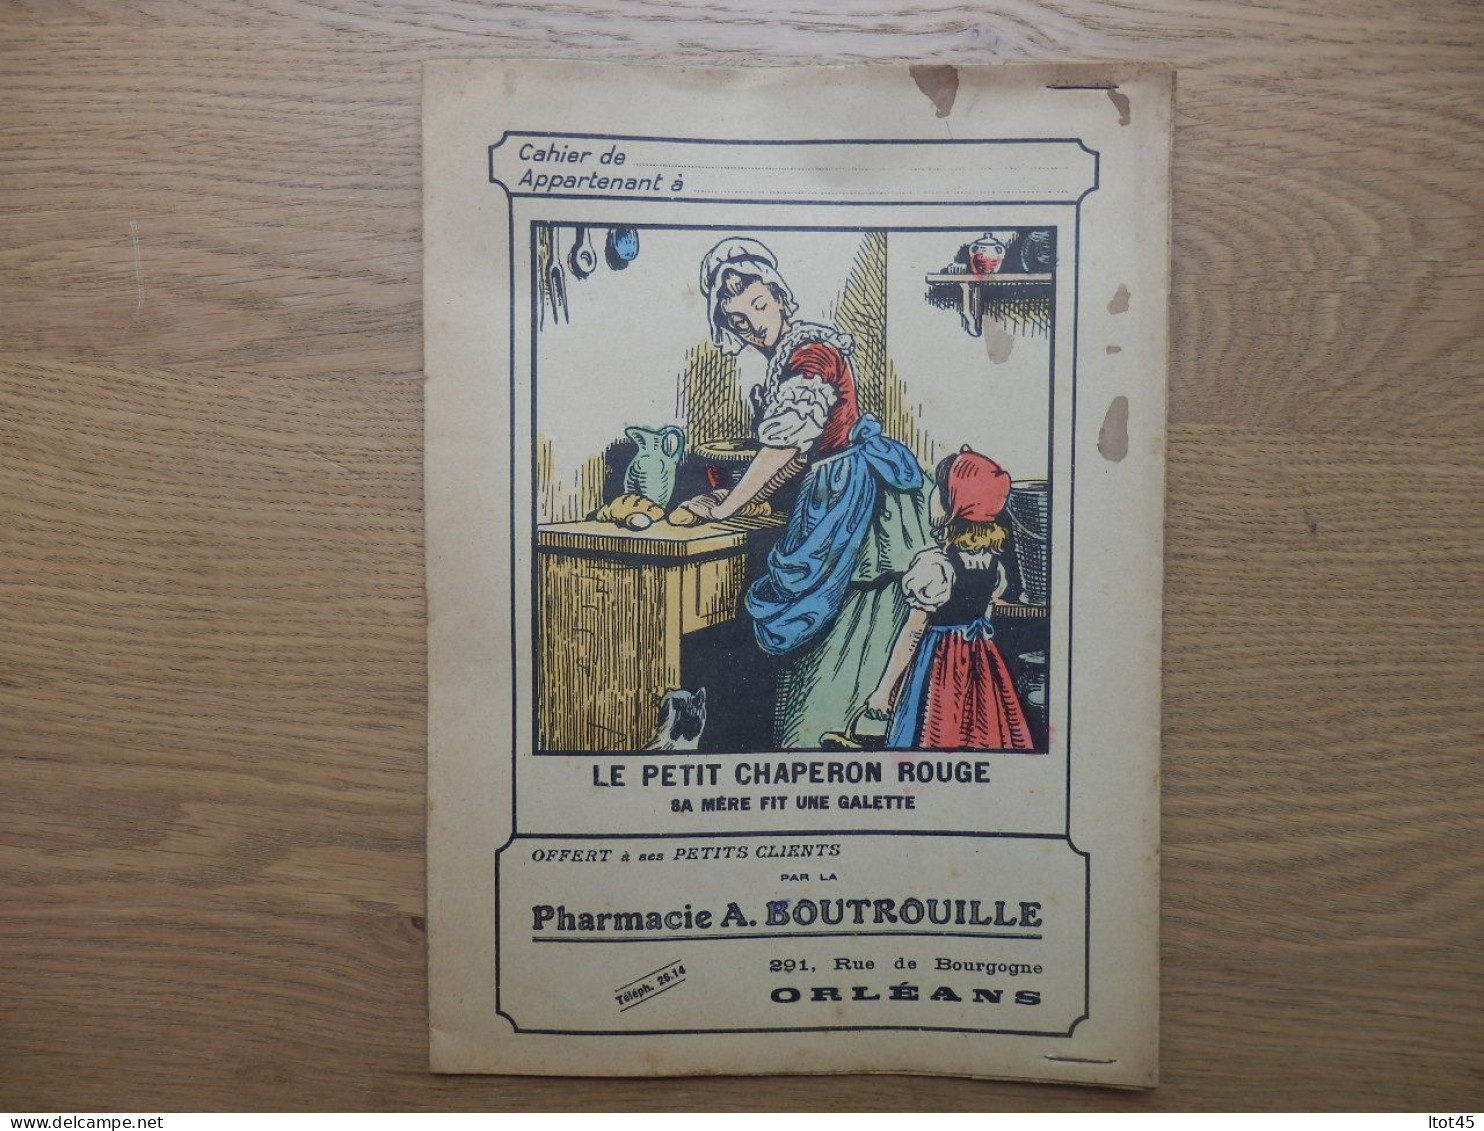 PROTEGE-CAHIER LE PETIT CHAPERON ROUGE PHARMACIE A. BOUTROUILLE ORLEANS - Book Covers